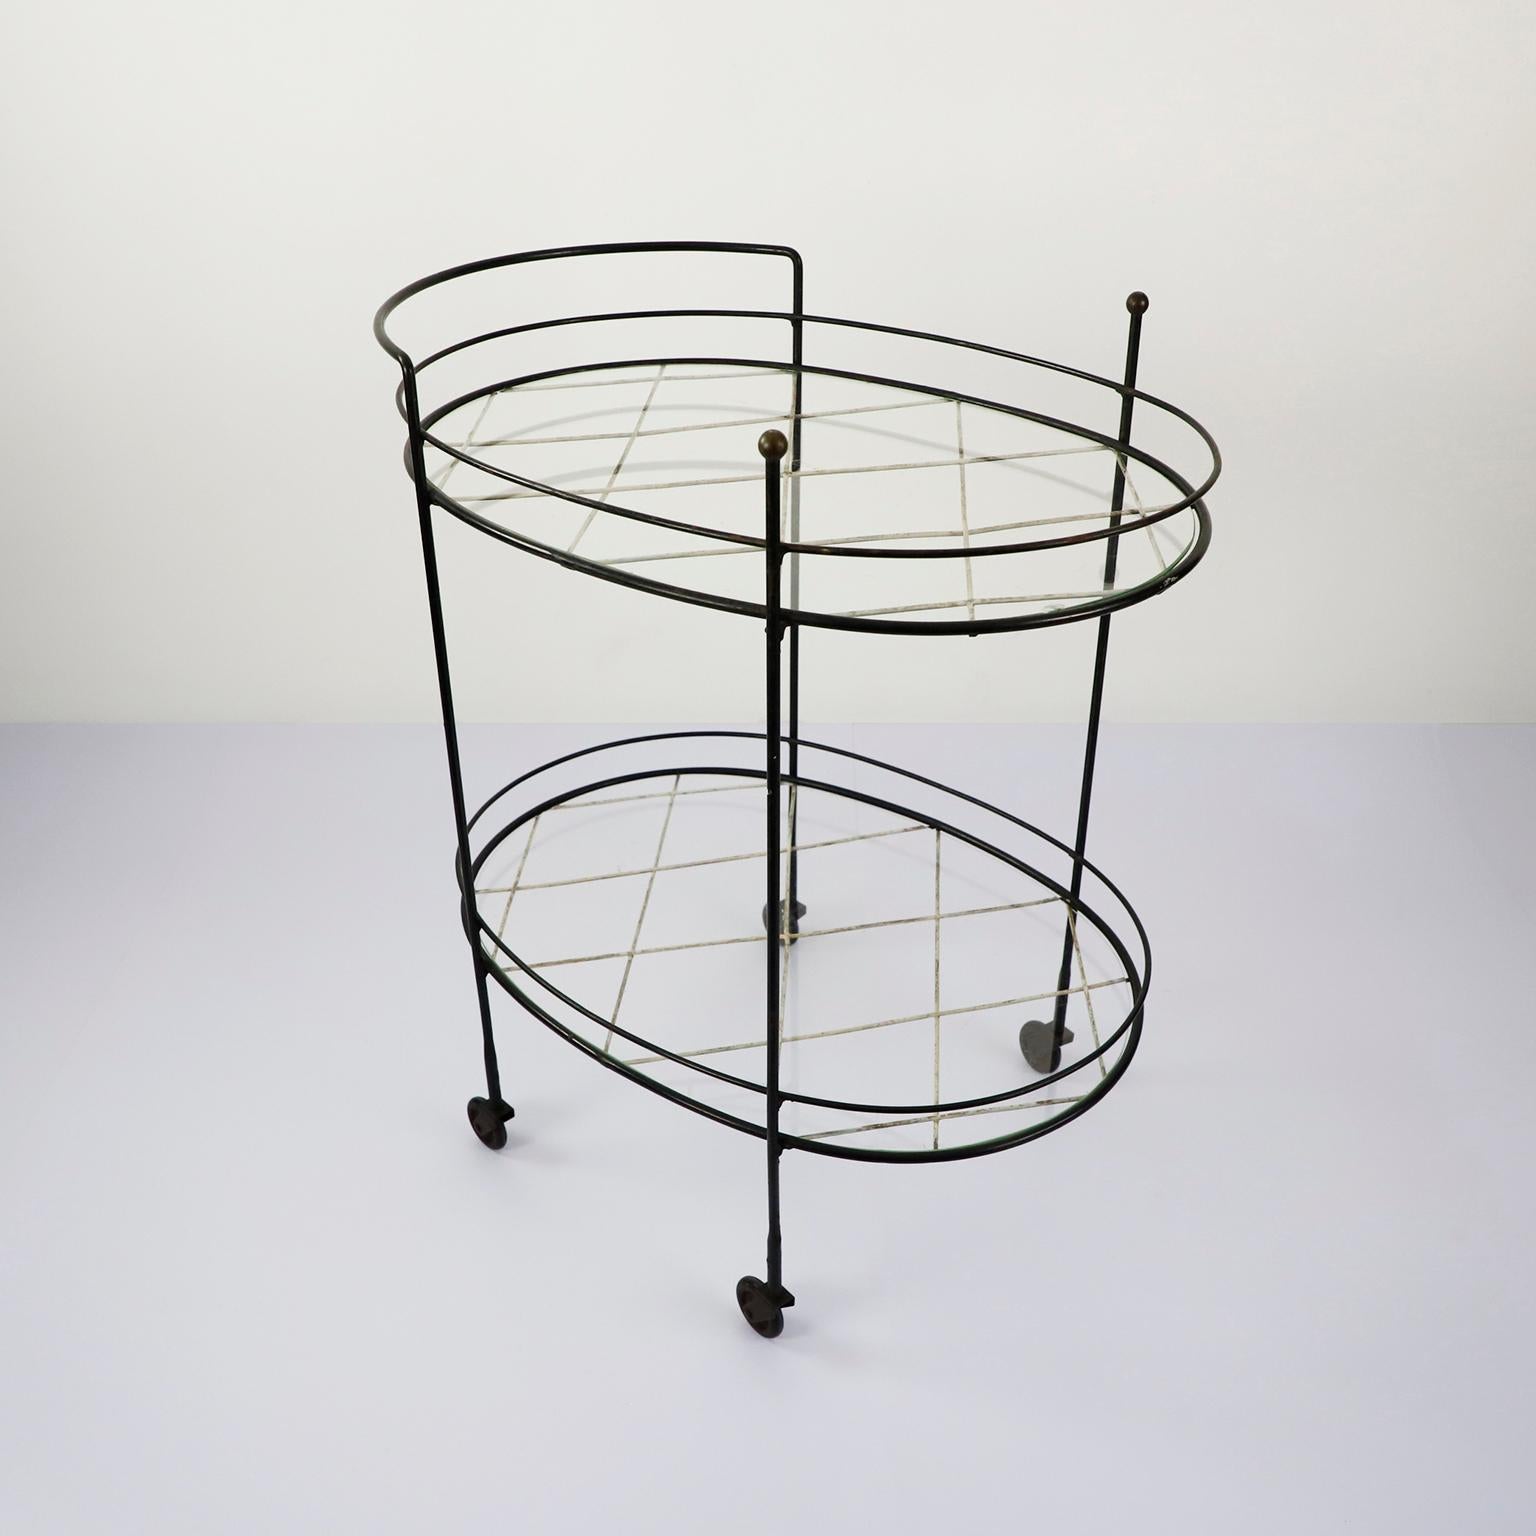 Circa 1960. We offer this iron metal serving cart, fantastic design with brass accents.